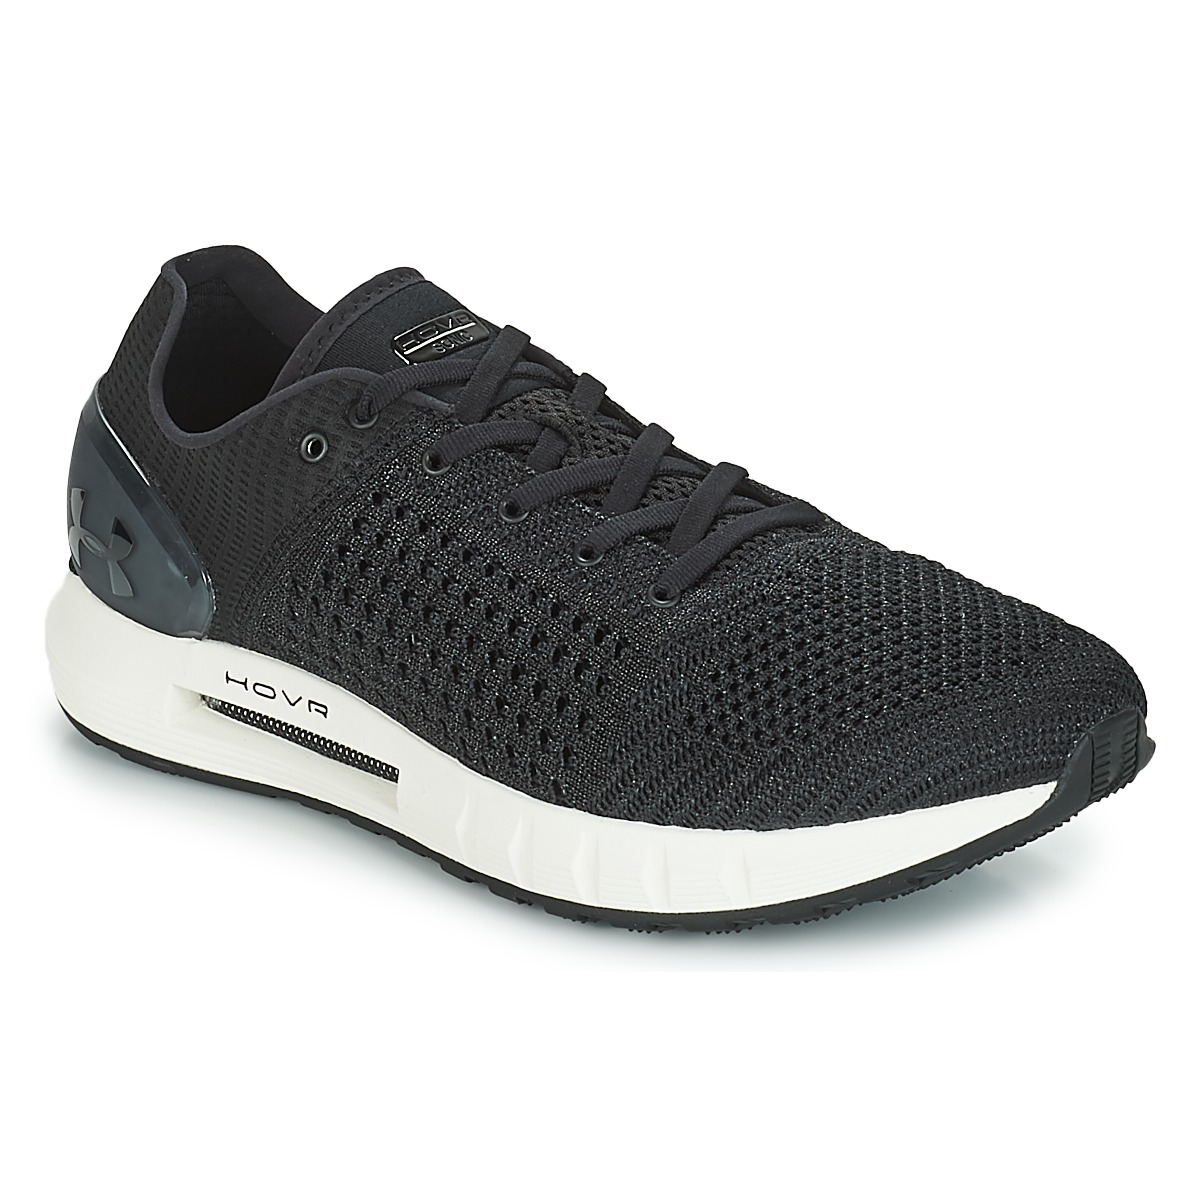 Chaussures Homme Running / trail Under Armour UA HOVR SONIC NC Noir